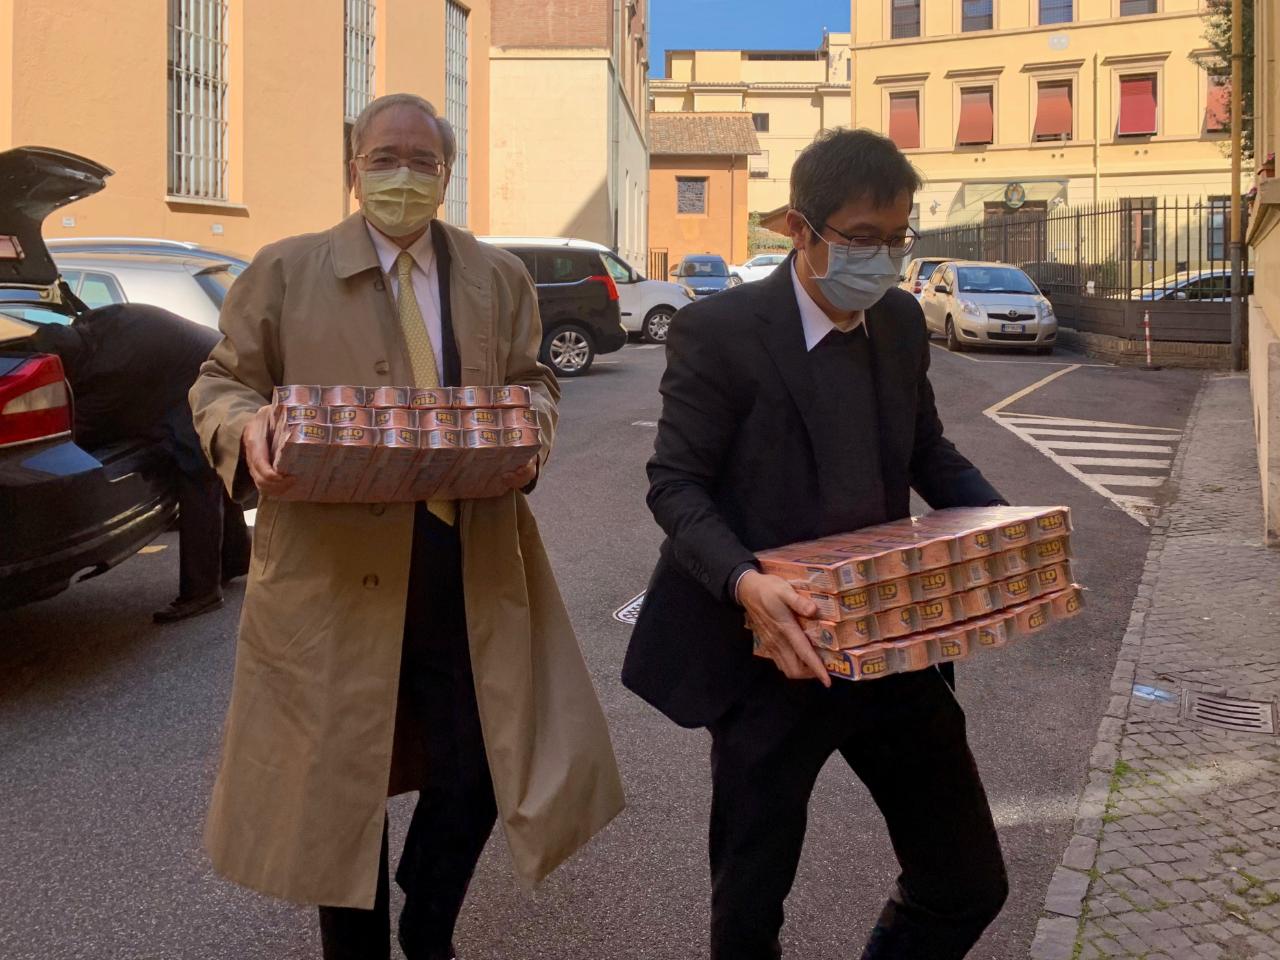 Taiwan’s embassy in the Vatican City earlier donated 600 tuna cans to a charity run by the authorities. The Holy See’s charity canteen has been shut down due to measures by the Italian government to curb the spread of the virus, said Ambassador Matthew Lee (李世明), adding that the donations had already been sent to the institute to be distributed among homeless people.